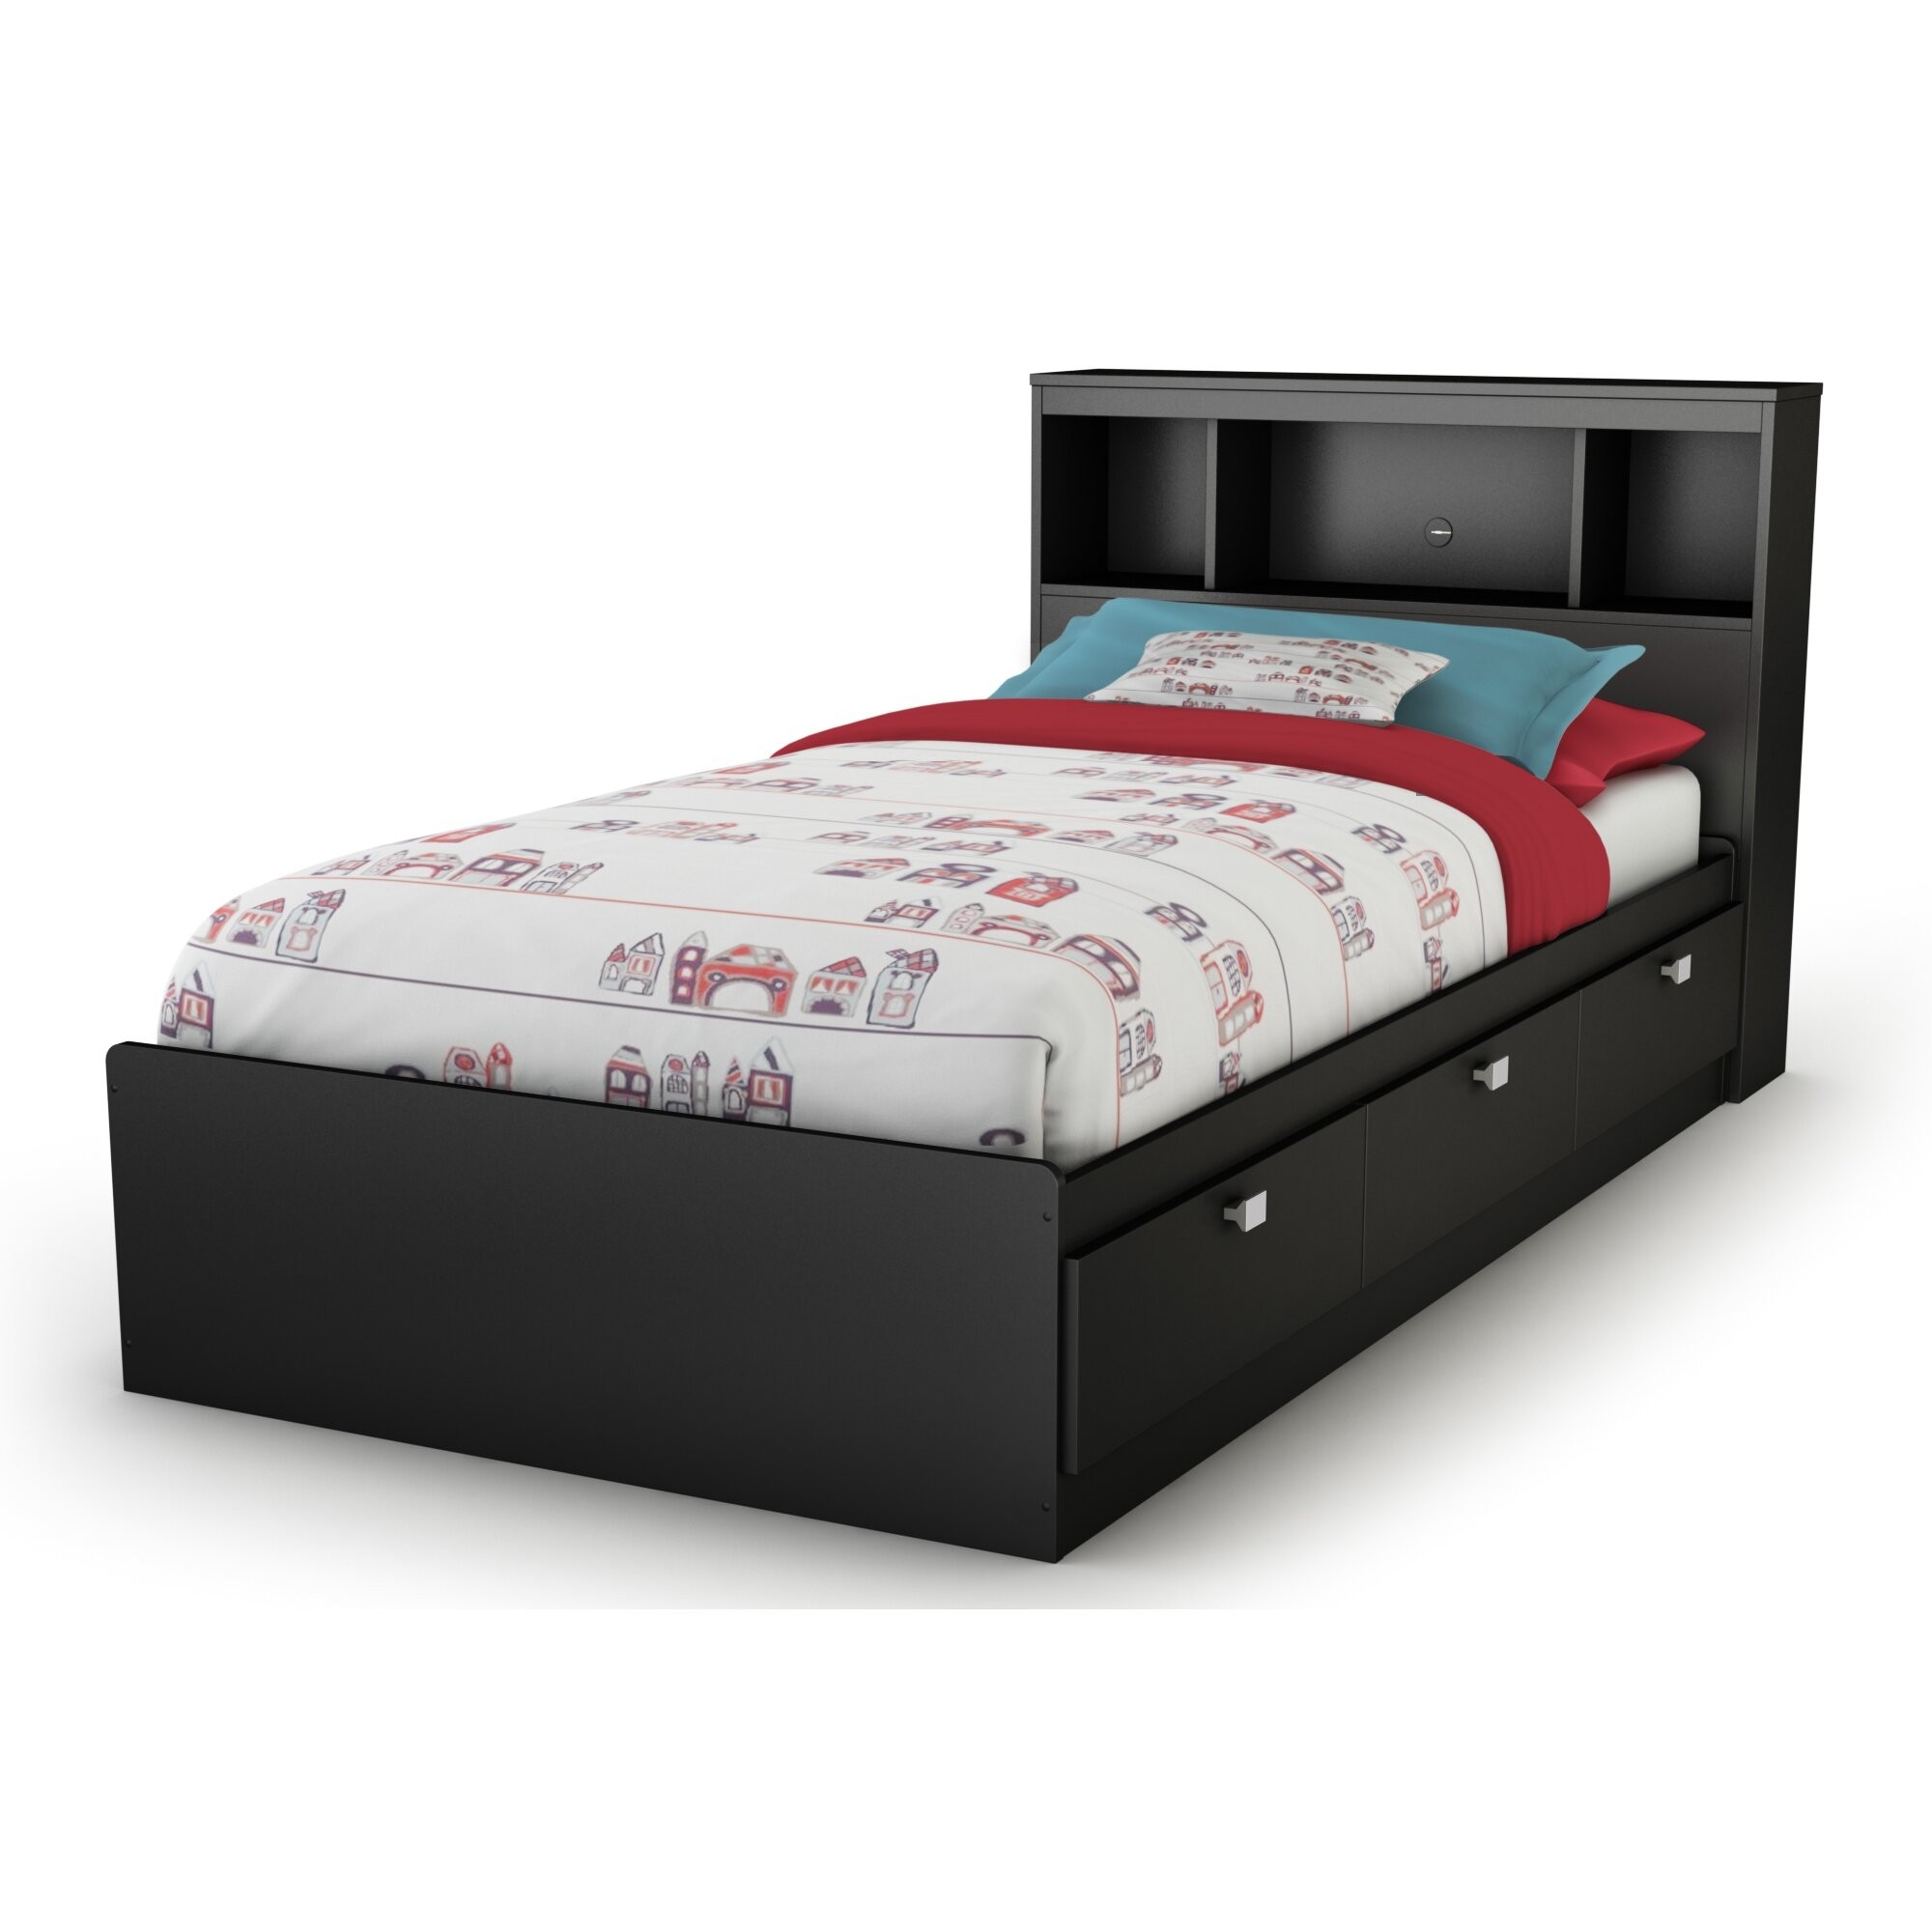 South Shore Spark Collection Twin Mates Bed, Pure Black